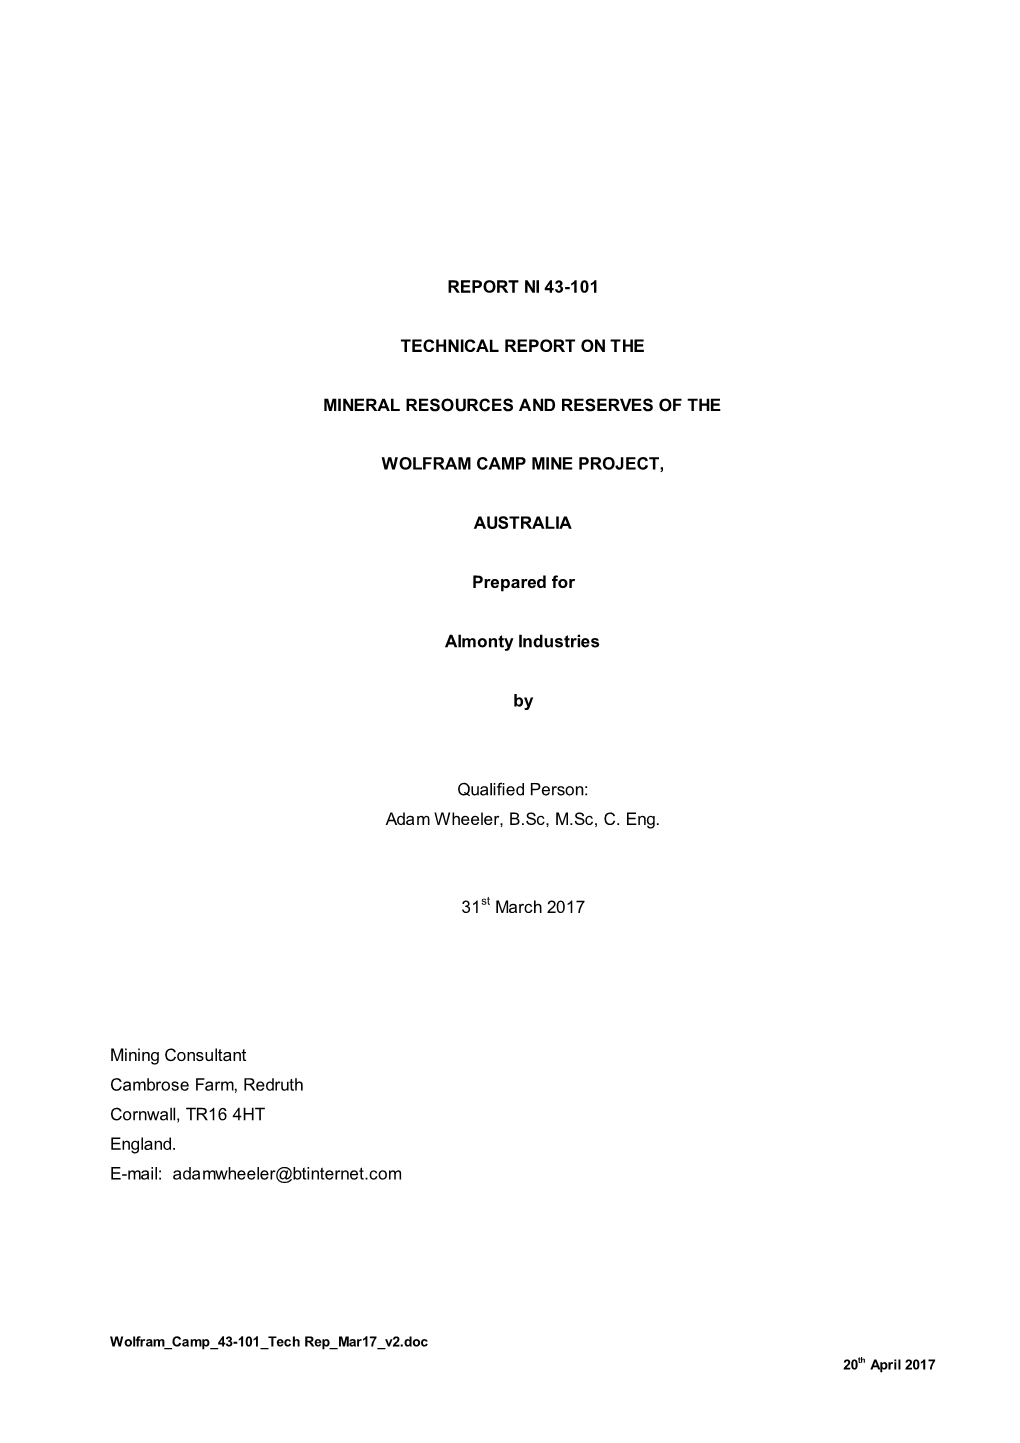 REPORT NI 43-101 TECHNICAL REPORT on the MINERAL RESOURCES and RESERVES of the WOLFRAM CAMP MINE PROJECT, AUSTRALIA Prepared